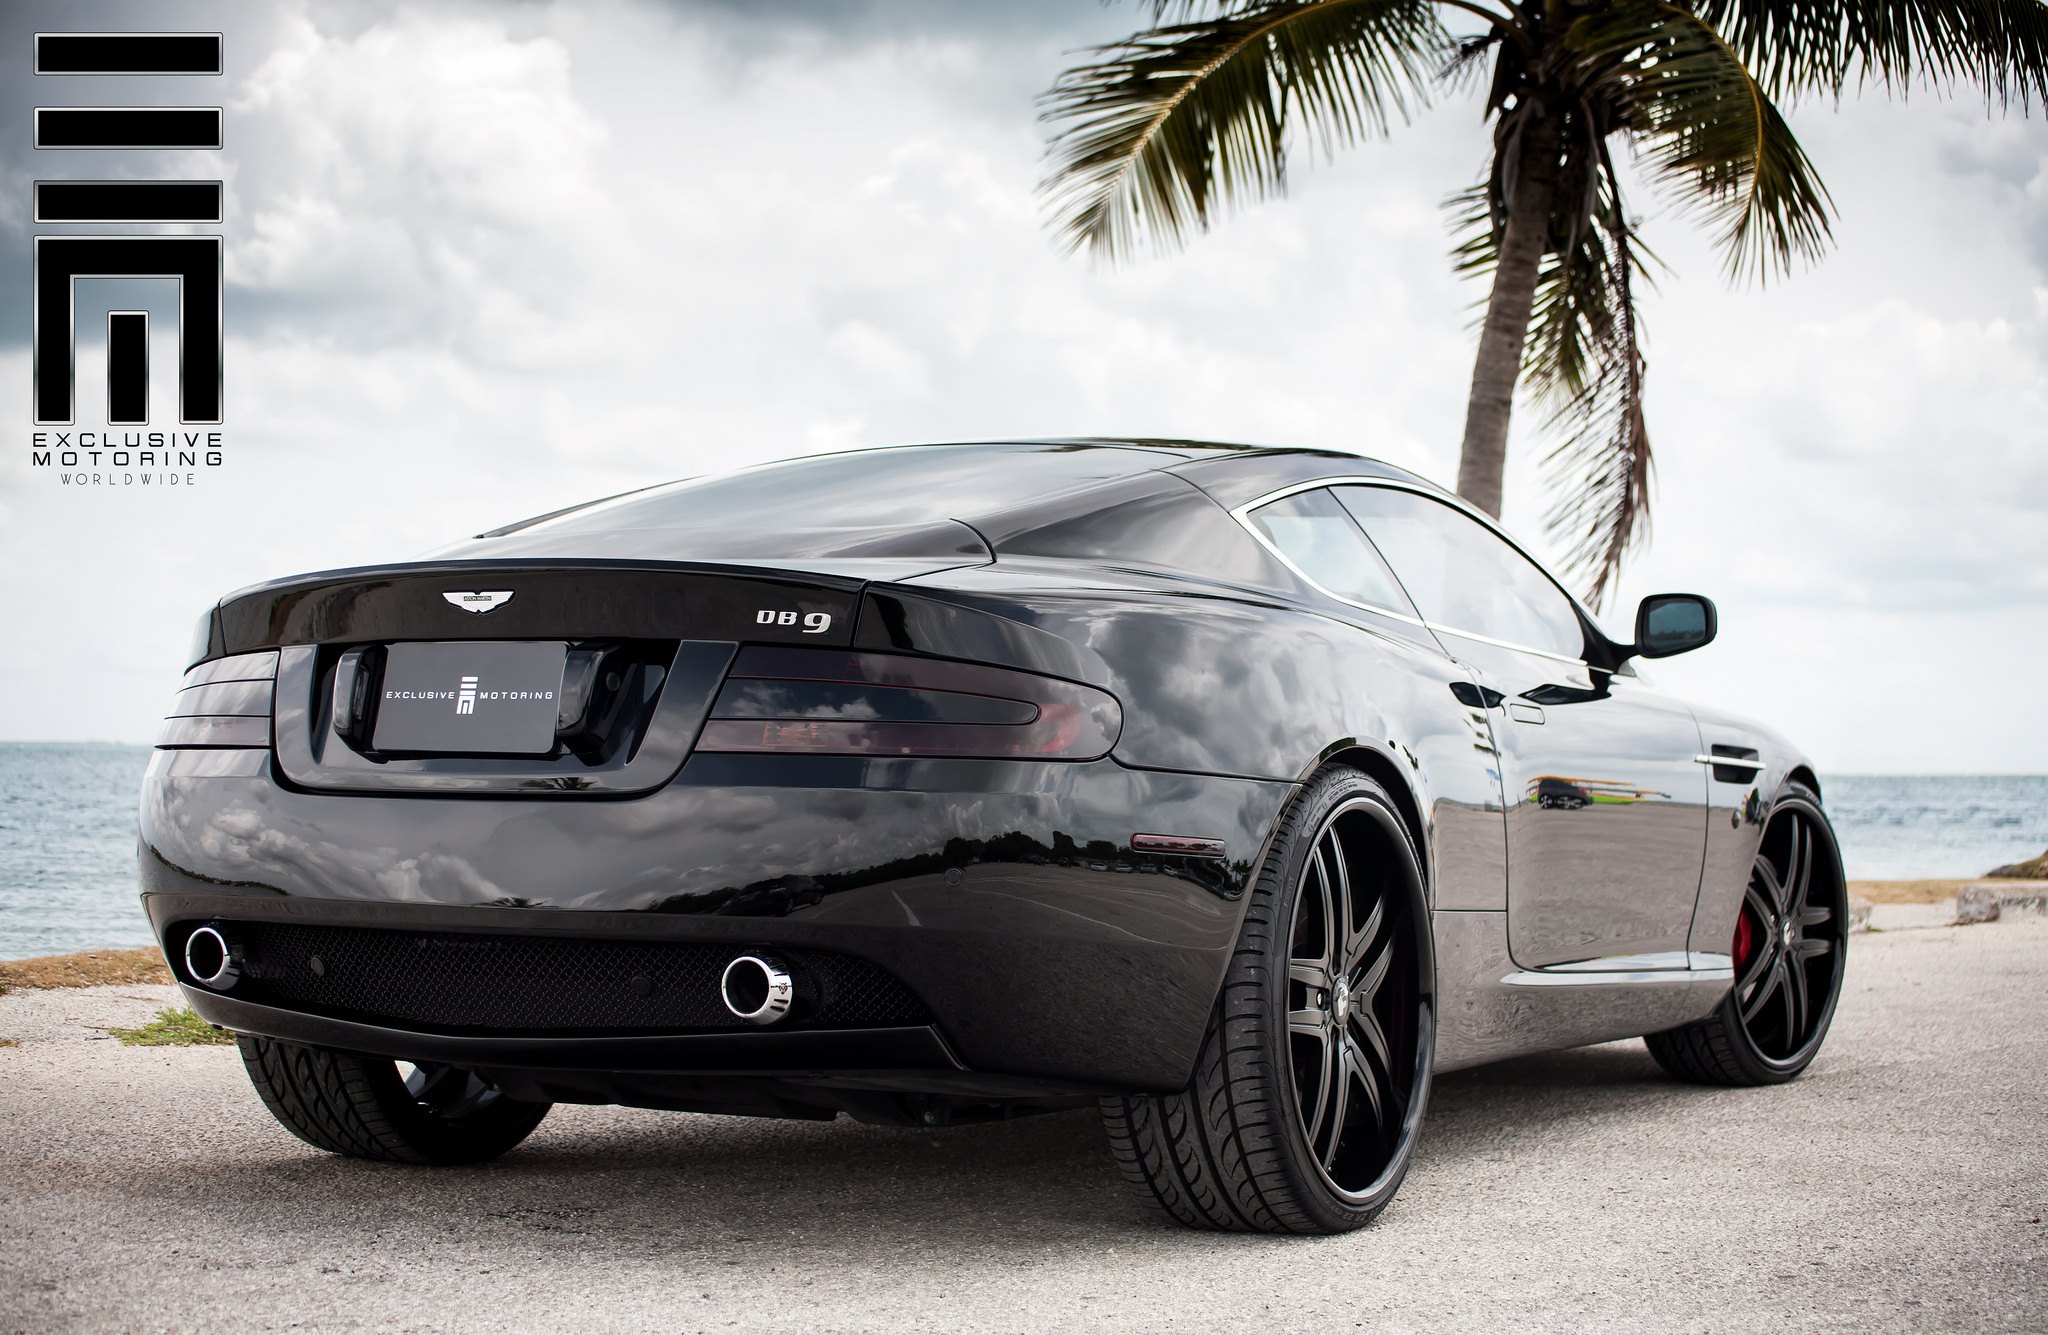 Beautiful rear view of Aston Martin DB9 - Photo by Exclusive Motoring